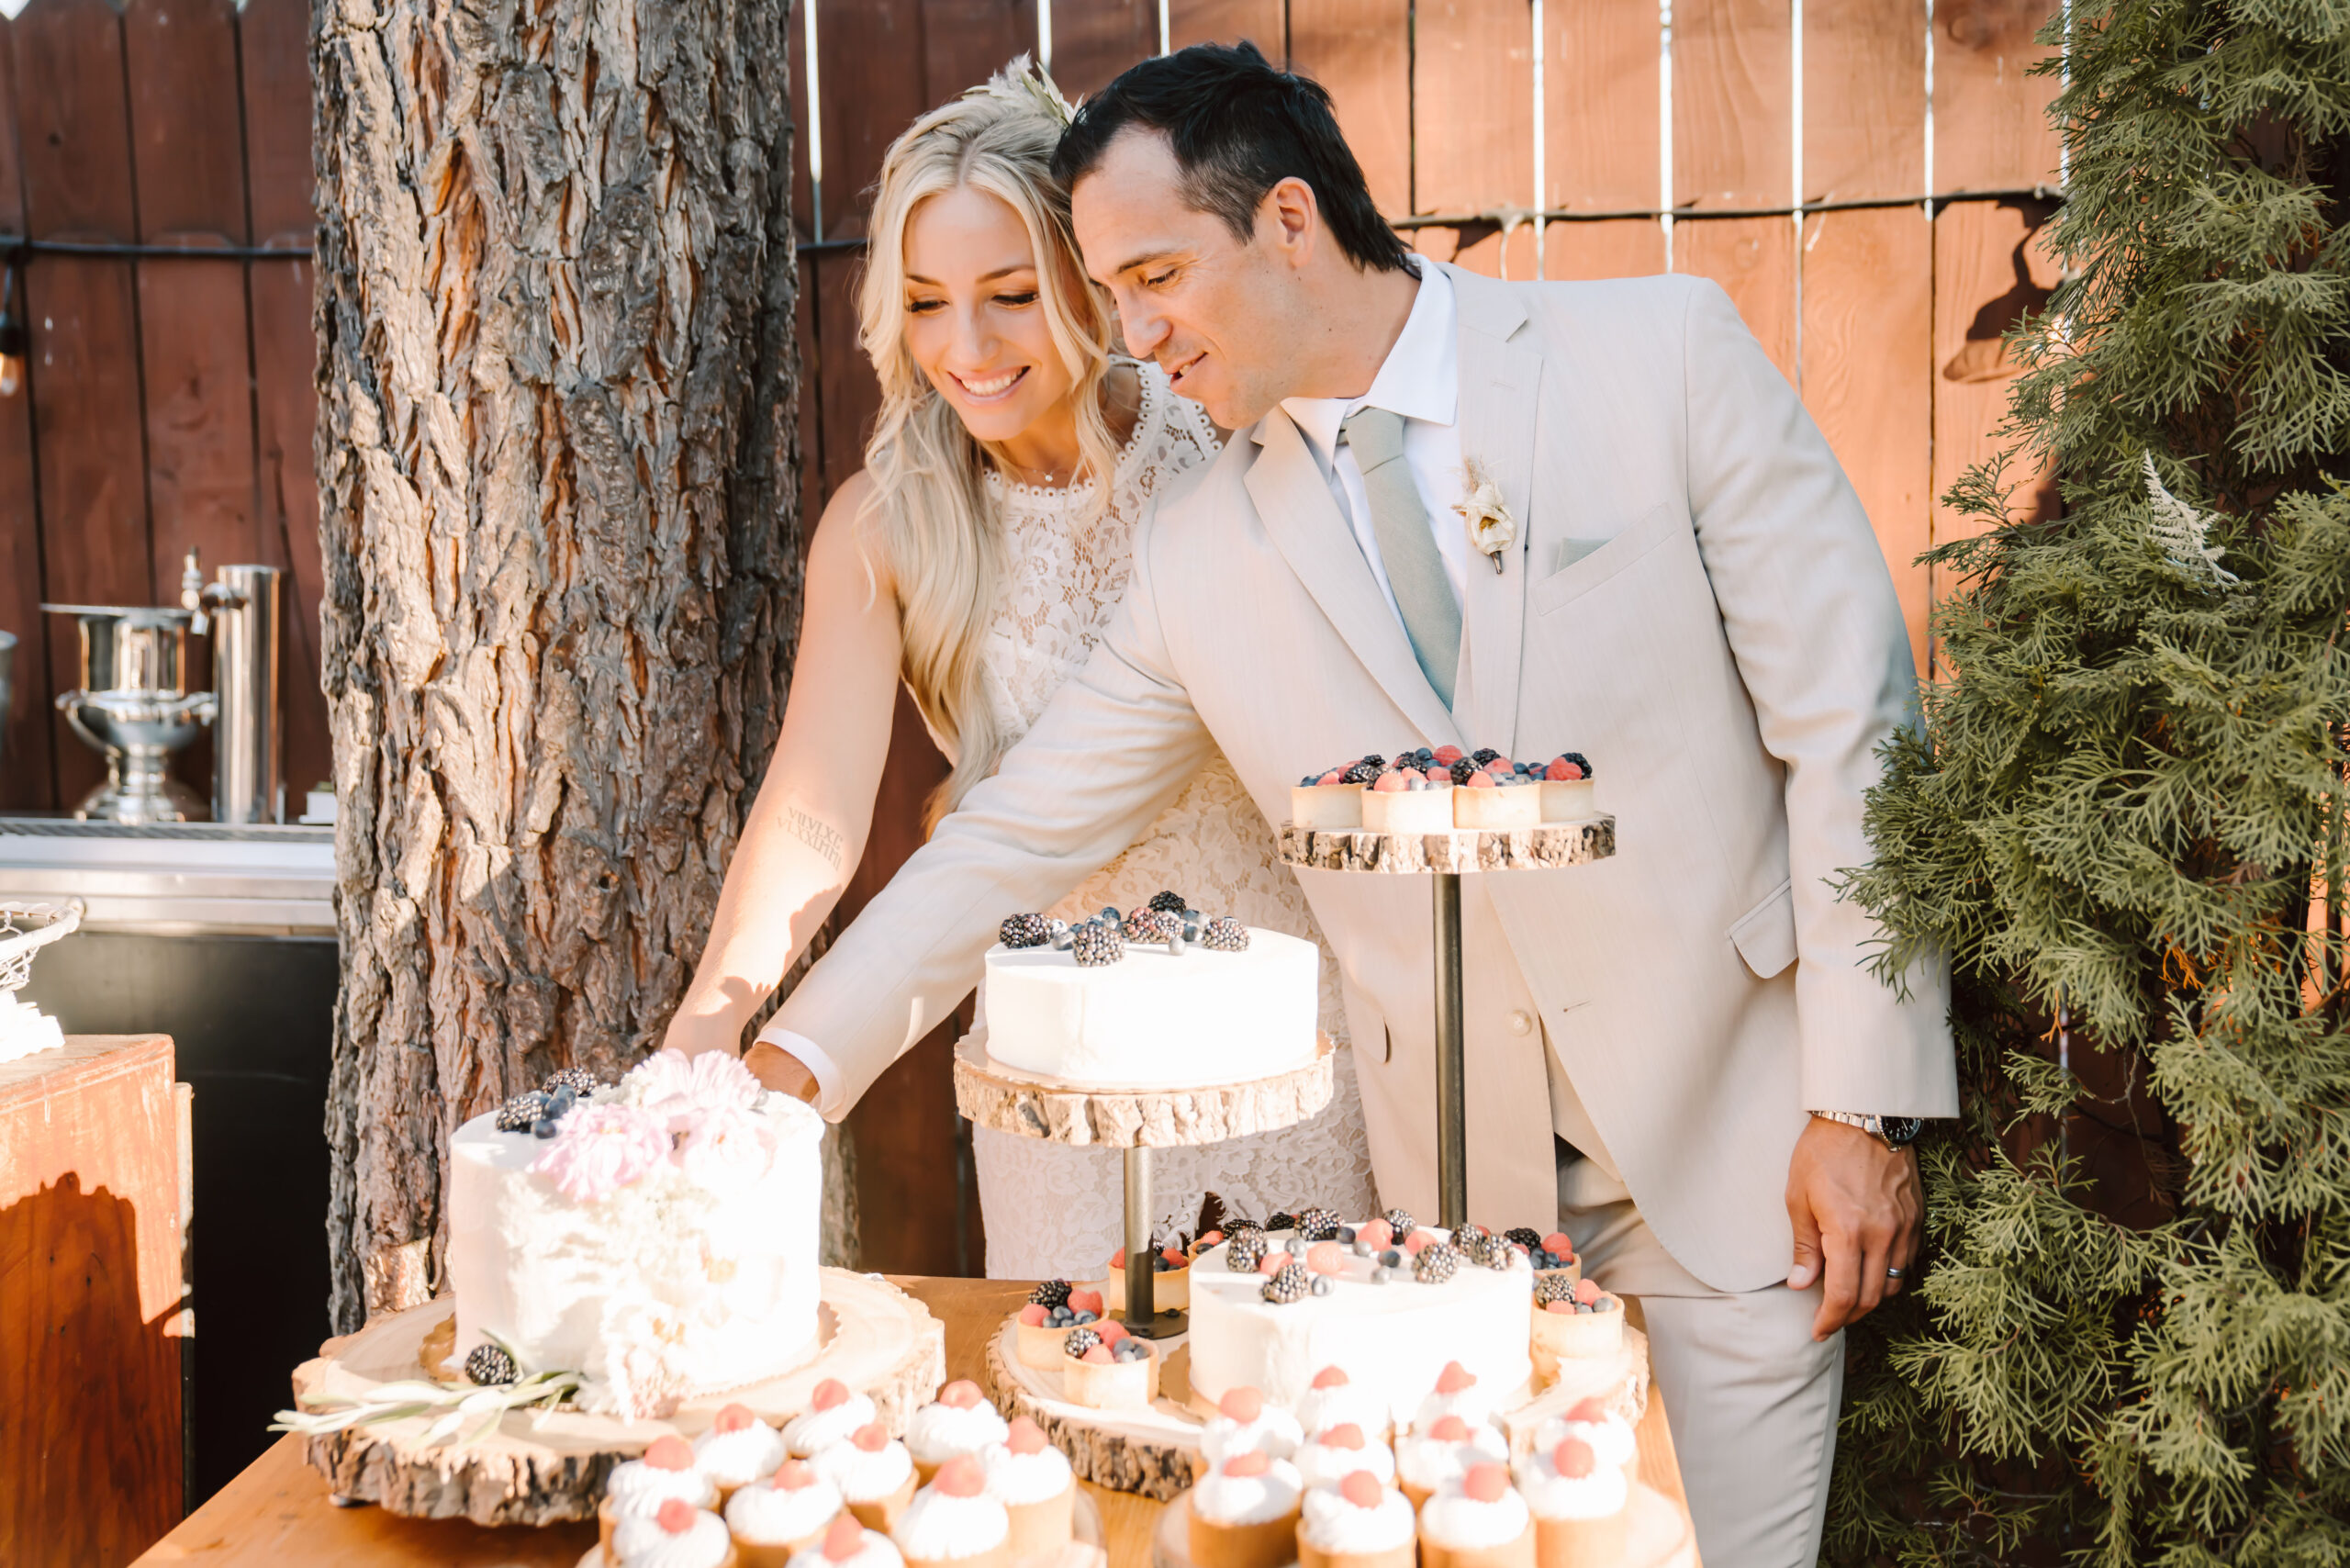 A bride and groom cutting their cake at their wedding reception at the Lakeview Social in Lake Tahoe